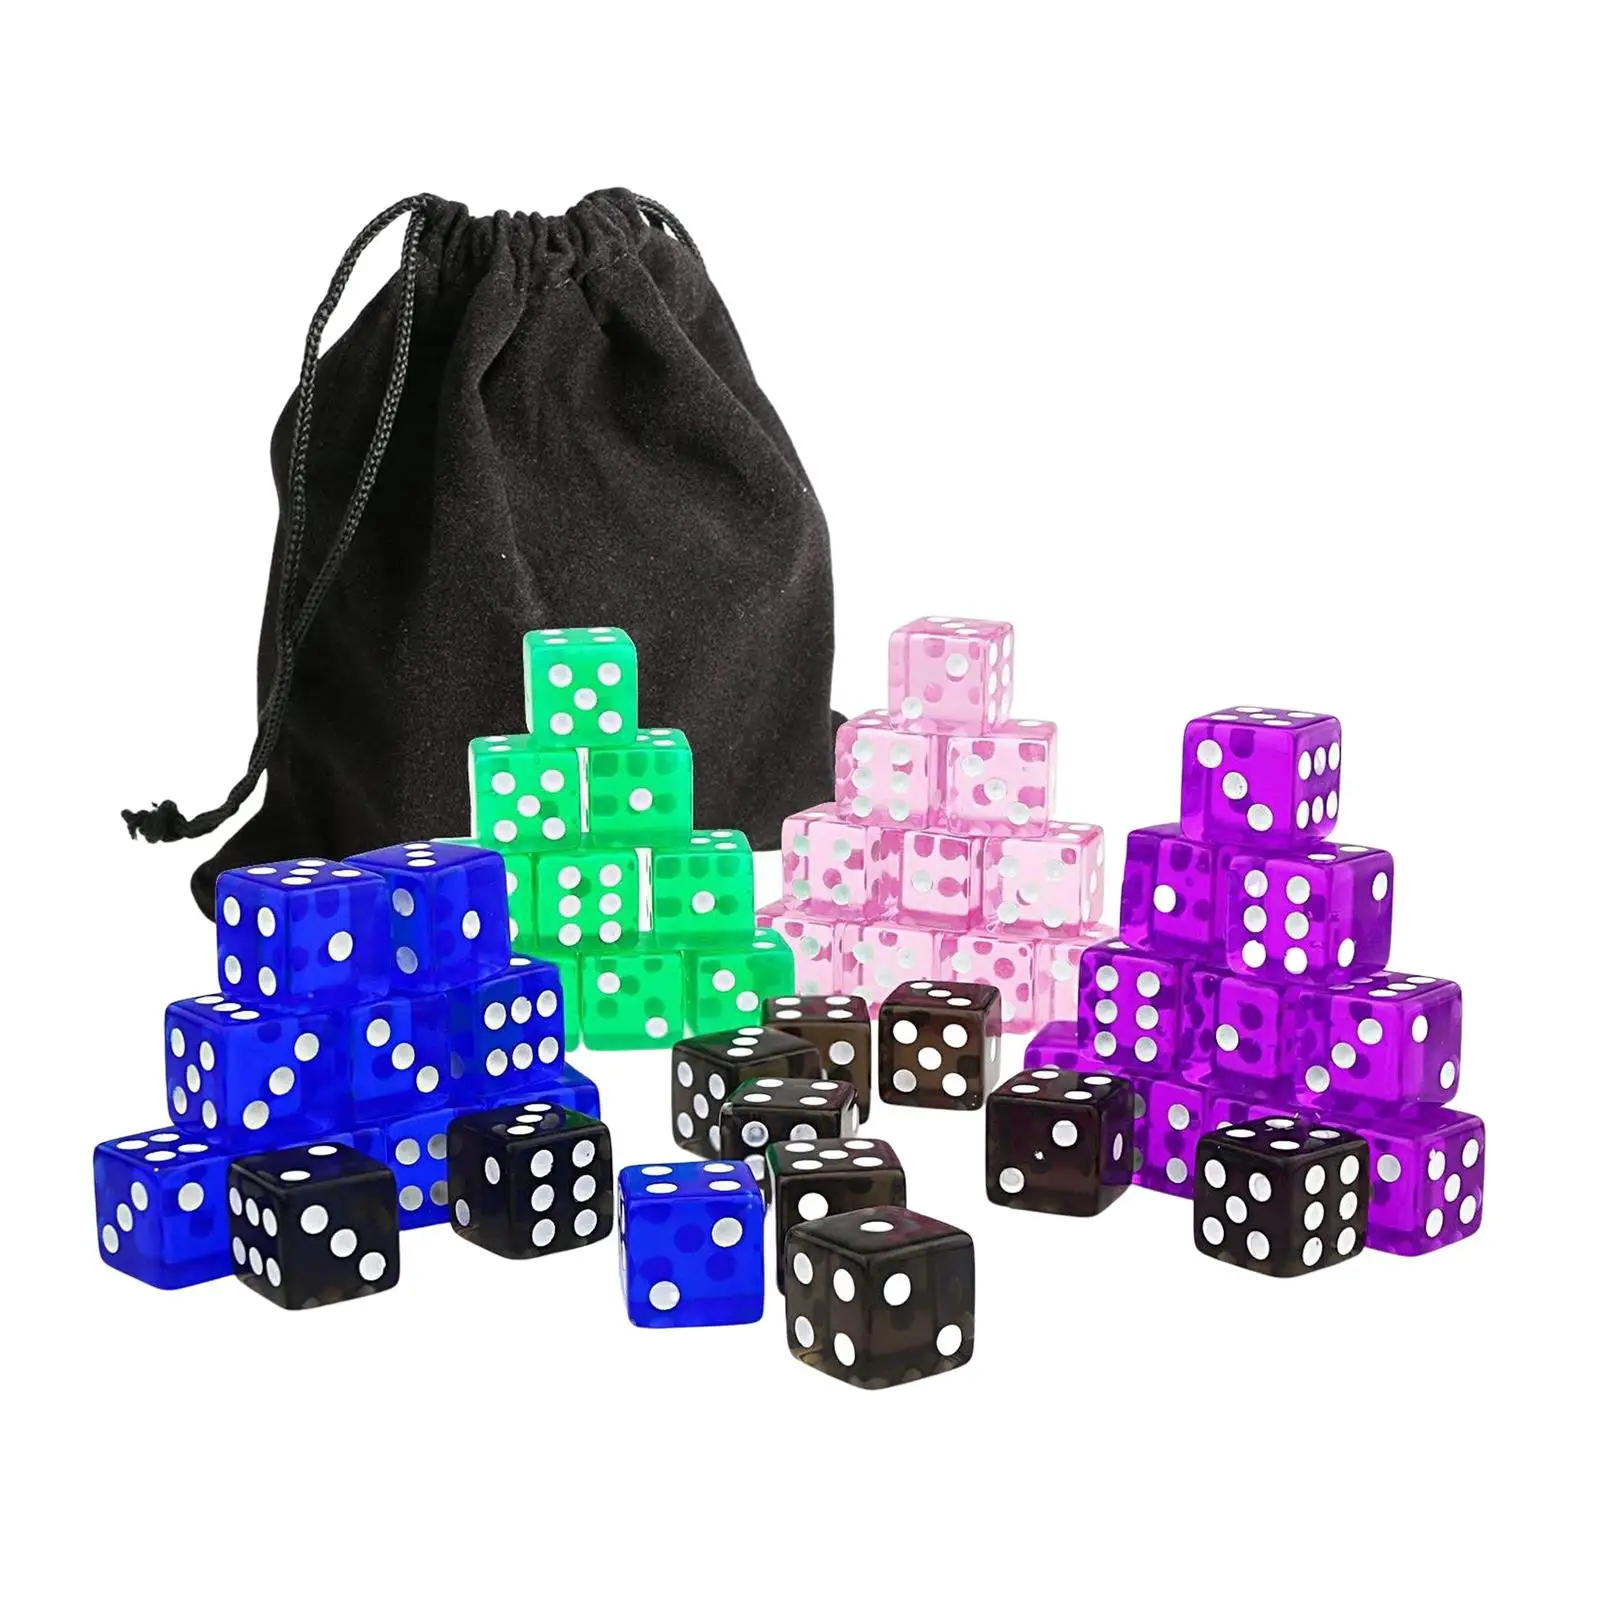 6 Sided Dices, Colored Dices, Math Counting Teaching Aids, Game Dices, Party Supplies